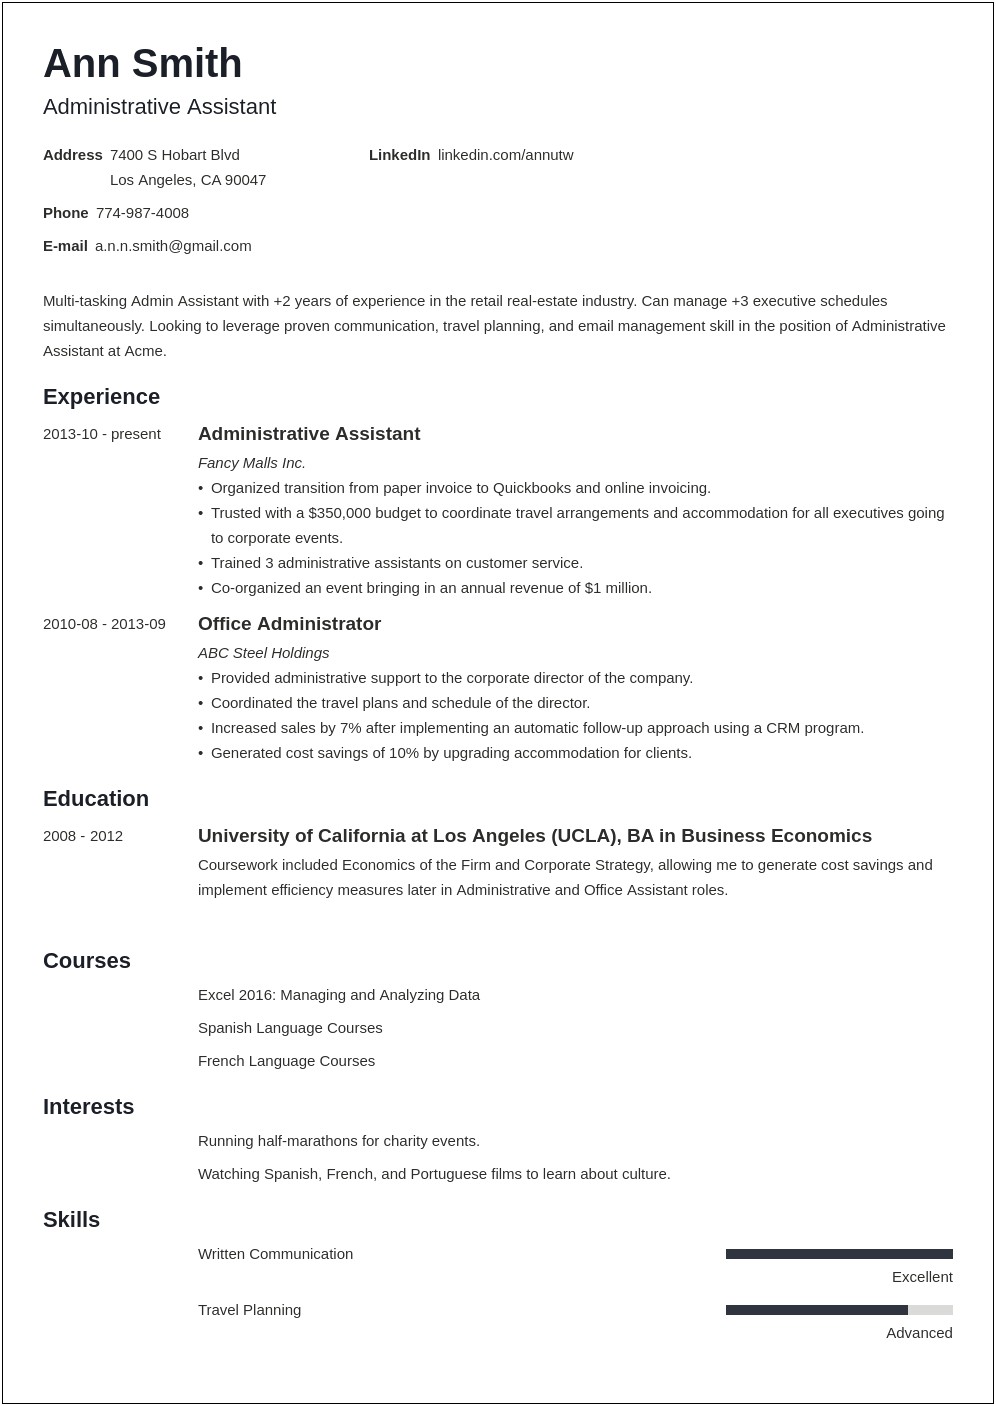 Example Title For Resume For Administrative Position